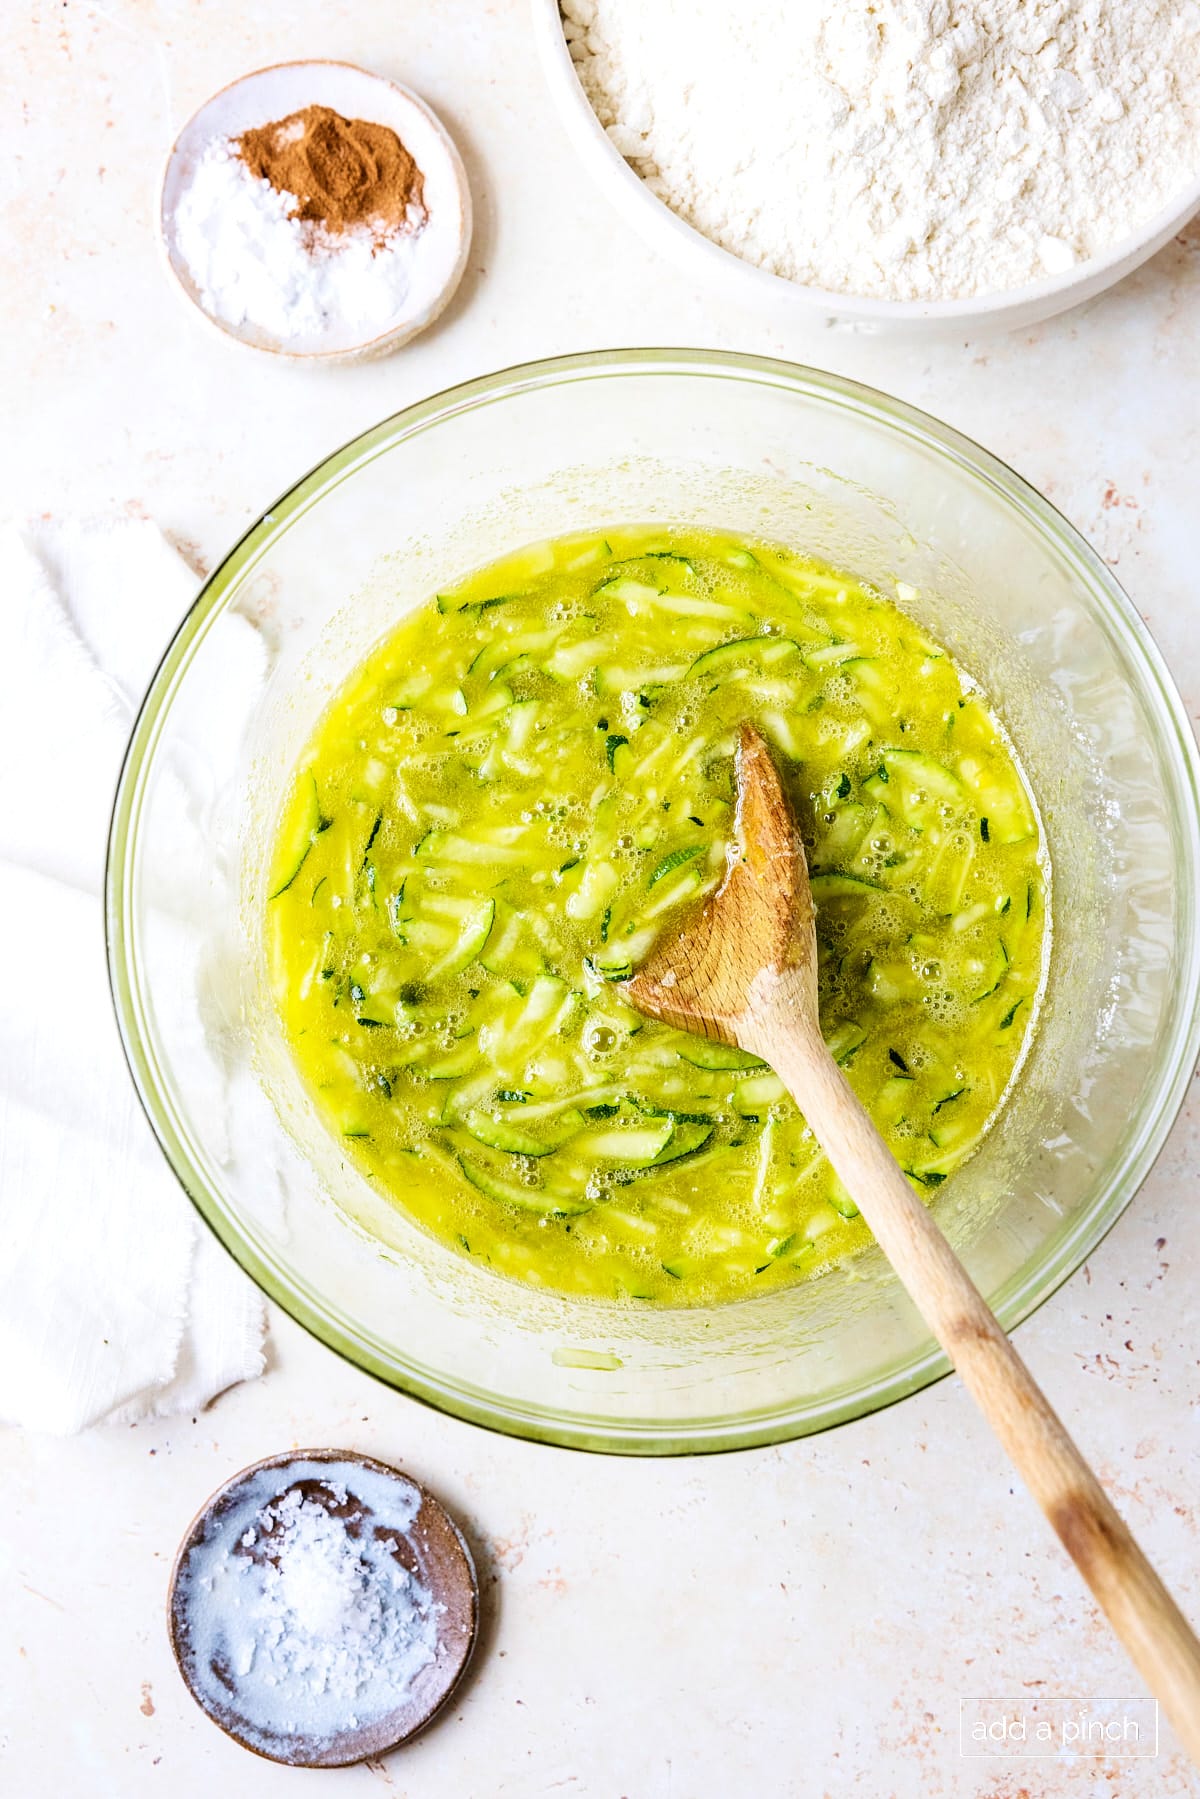 Mix sugar, zucchini and egg mixture in a glass bowl with a wooden spoon.